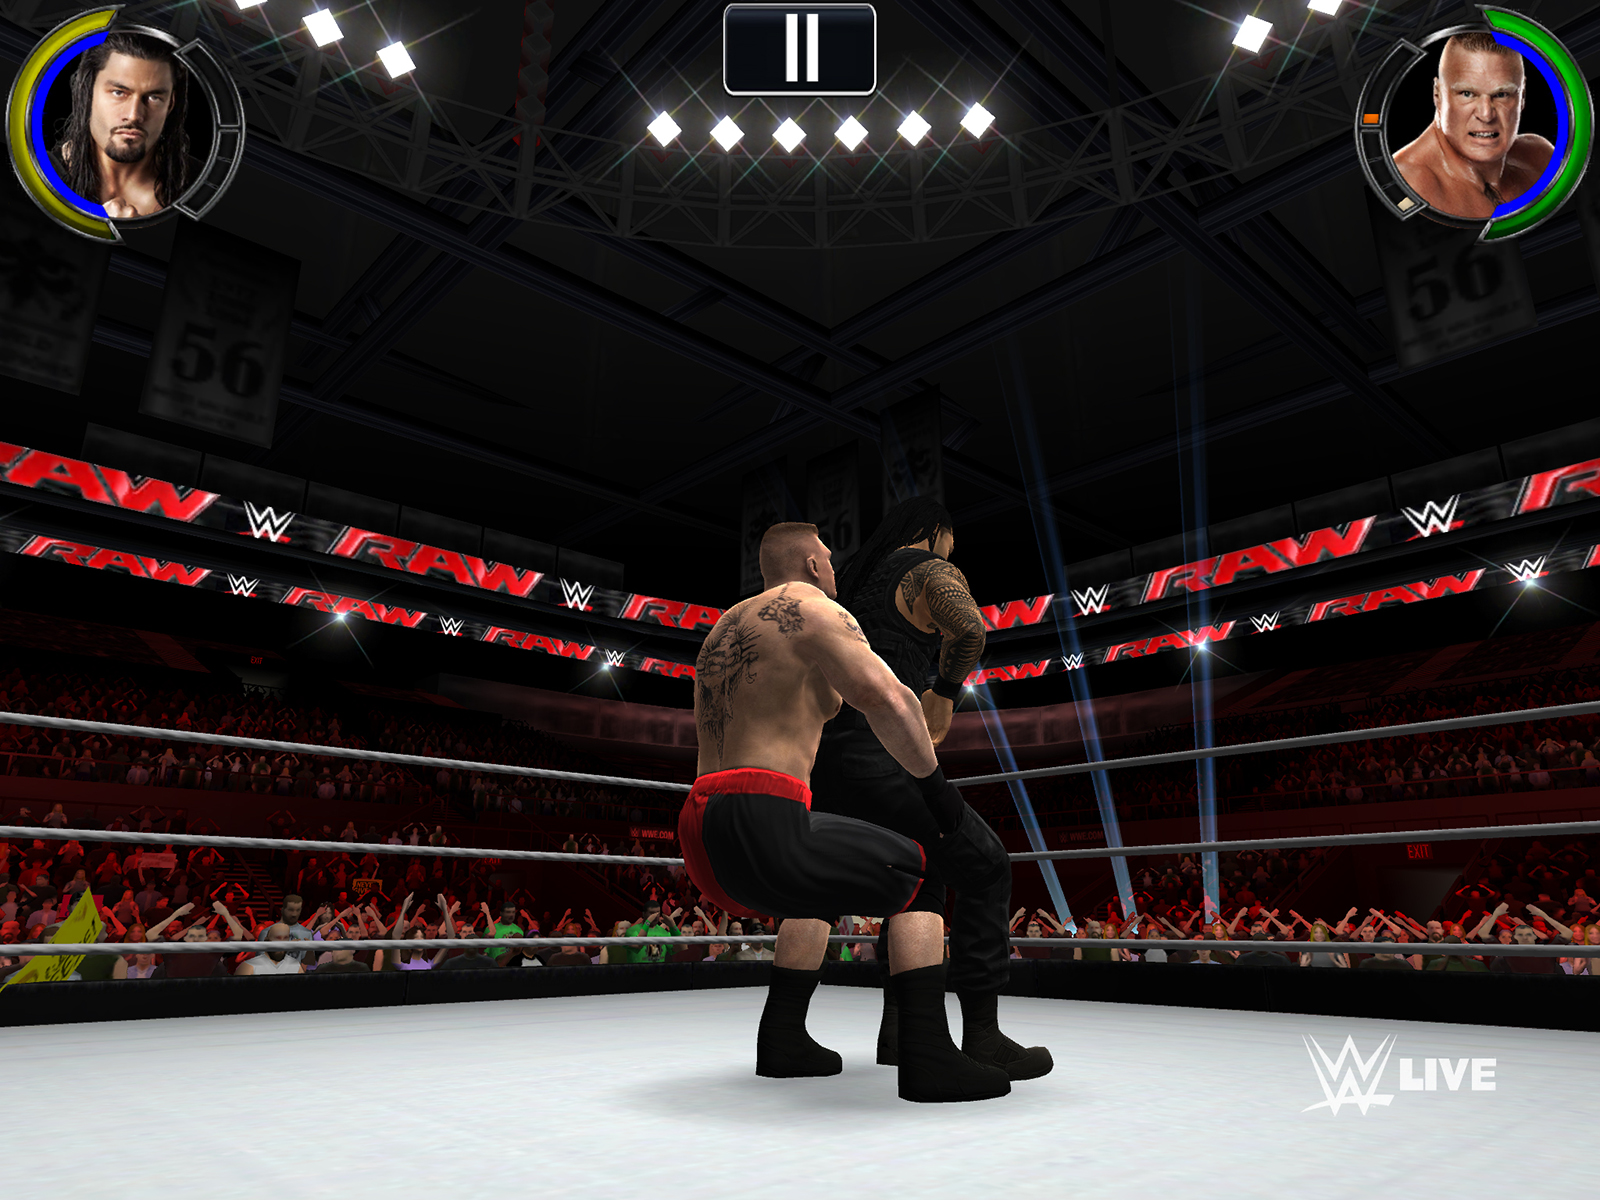 Wwe 2k16 3d game download for mobile